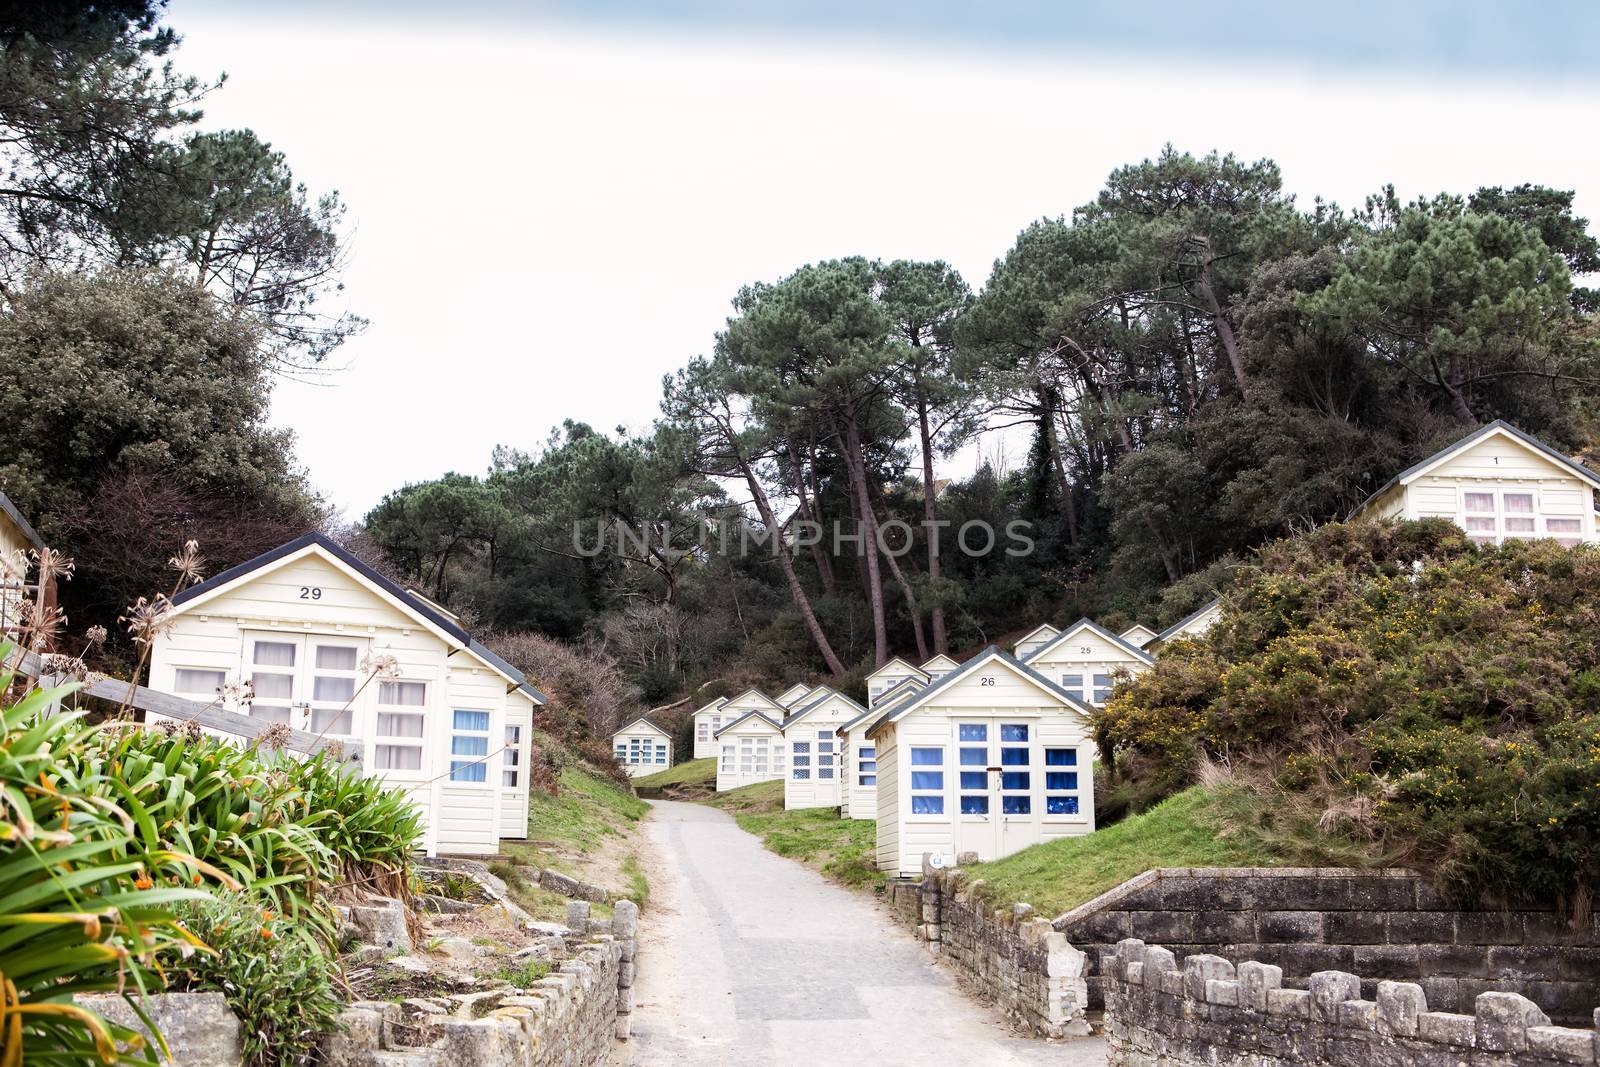 Situated along Bournemouth’s seven miles of award winning beaches there are over 250 beach huts